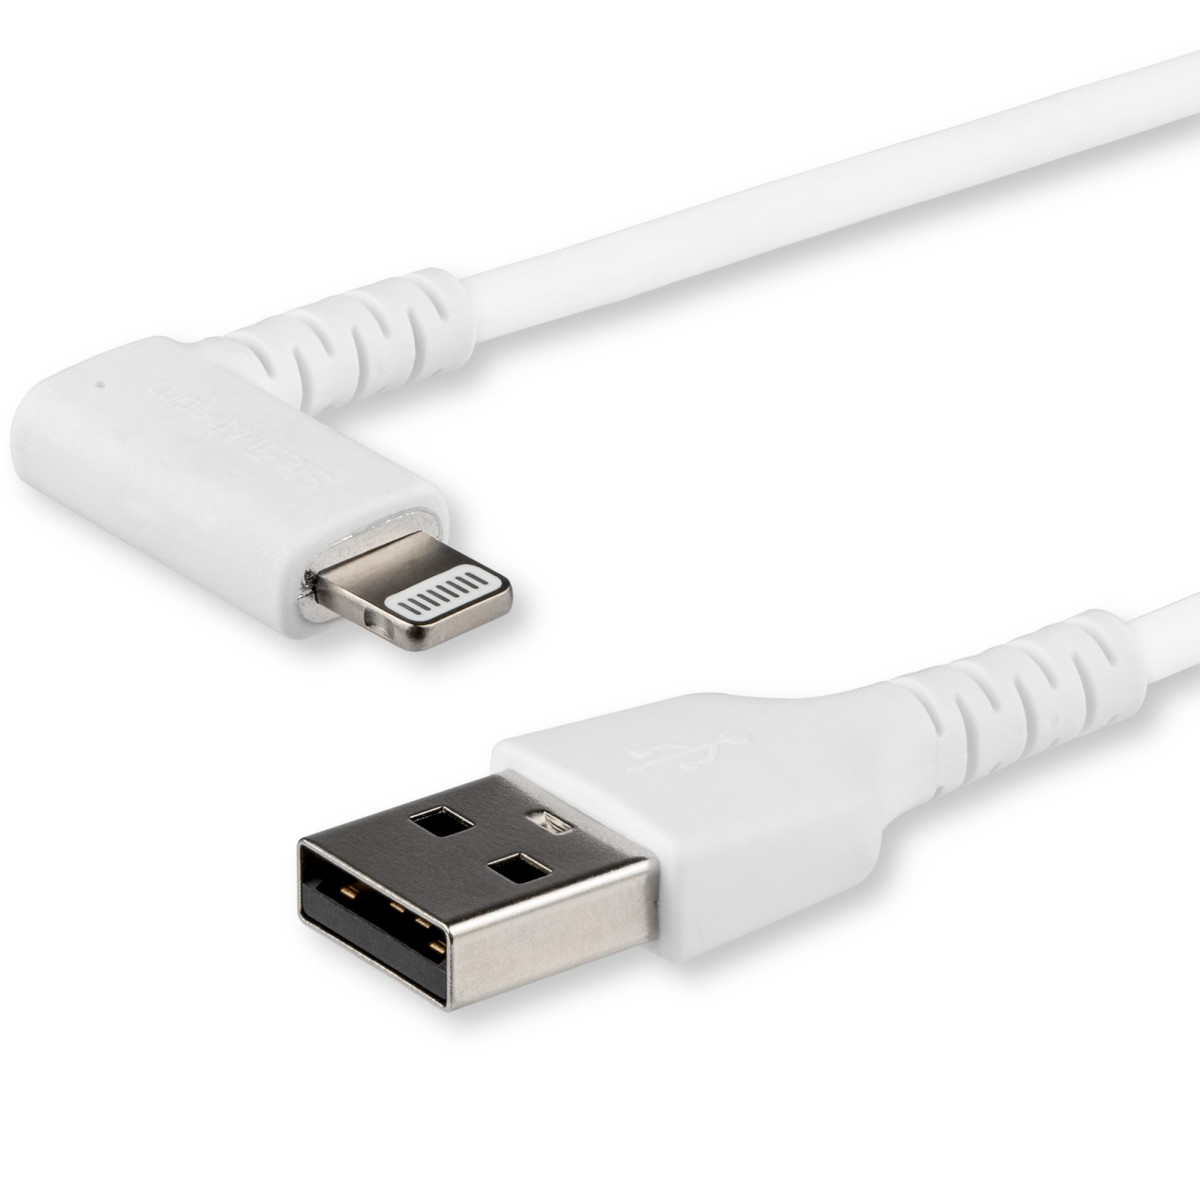 Cable - White Angled Lightning to USB 2m